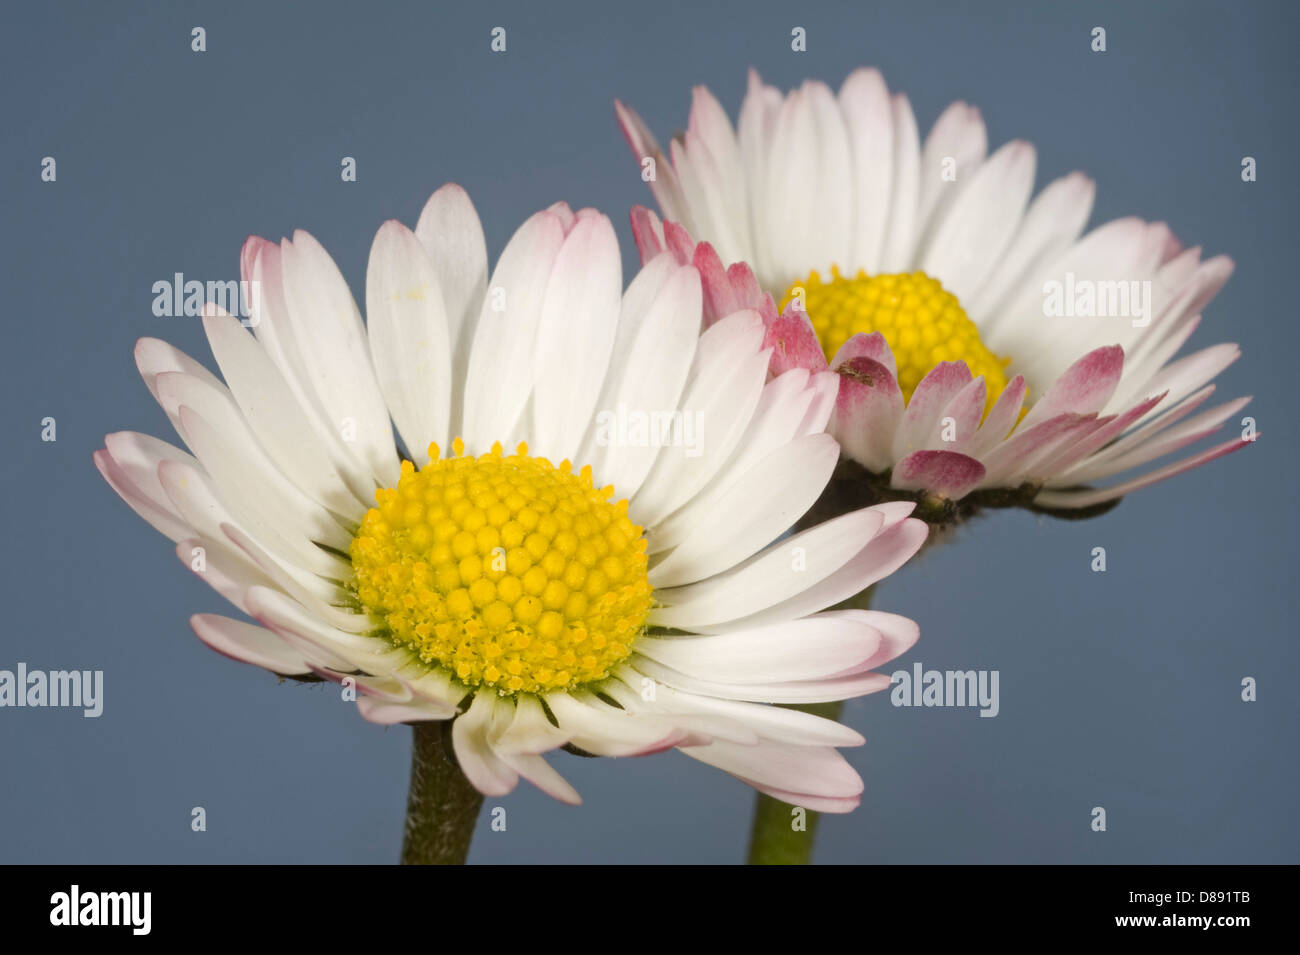 Flower of a daisy, Bellis perennis, with a slight pink tinge Stock Photo